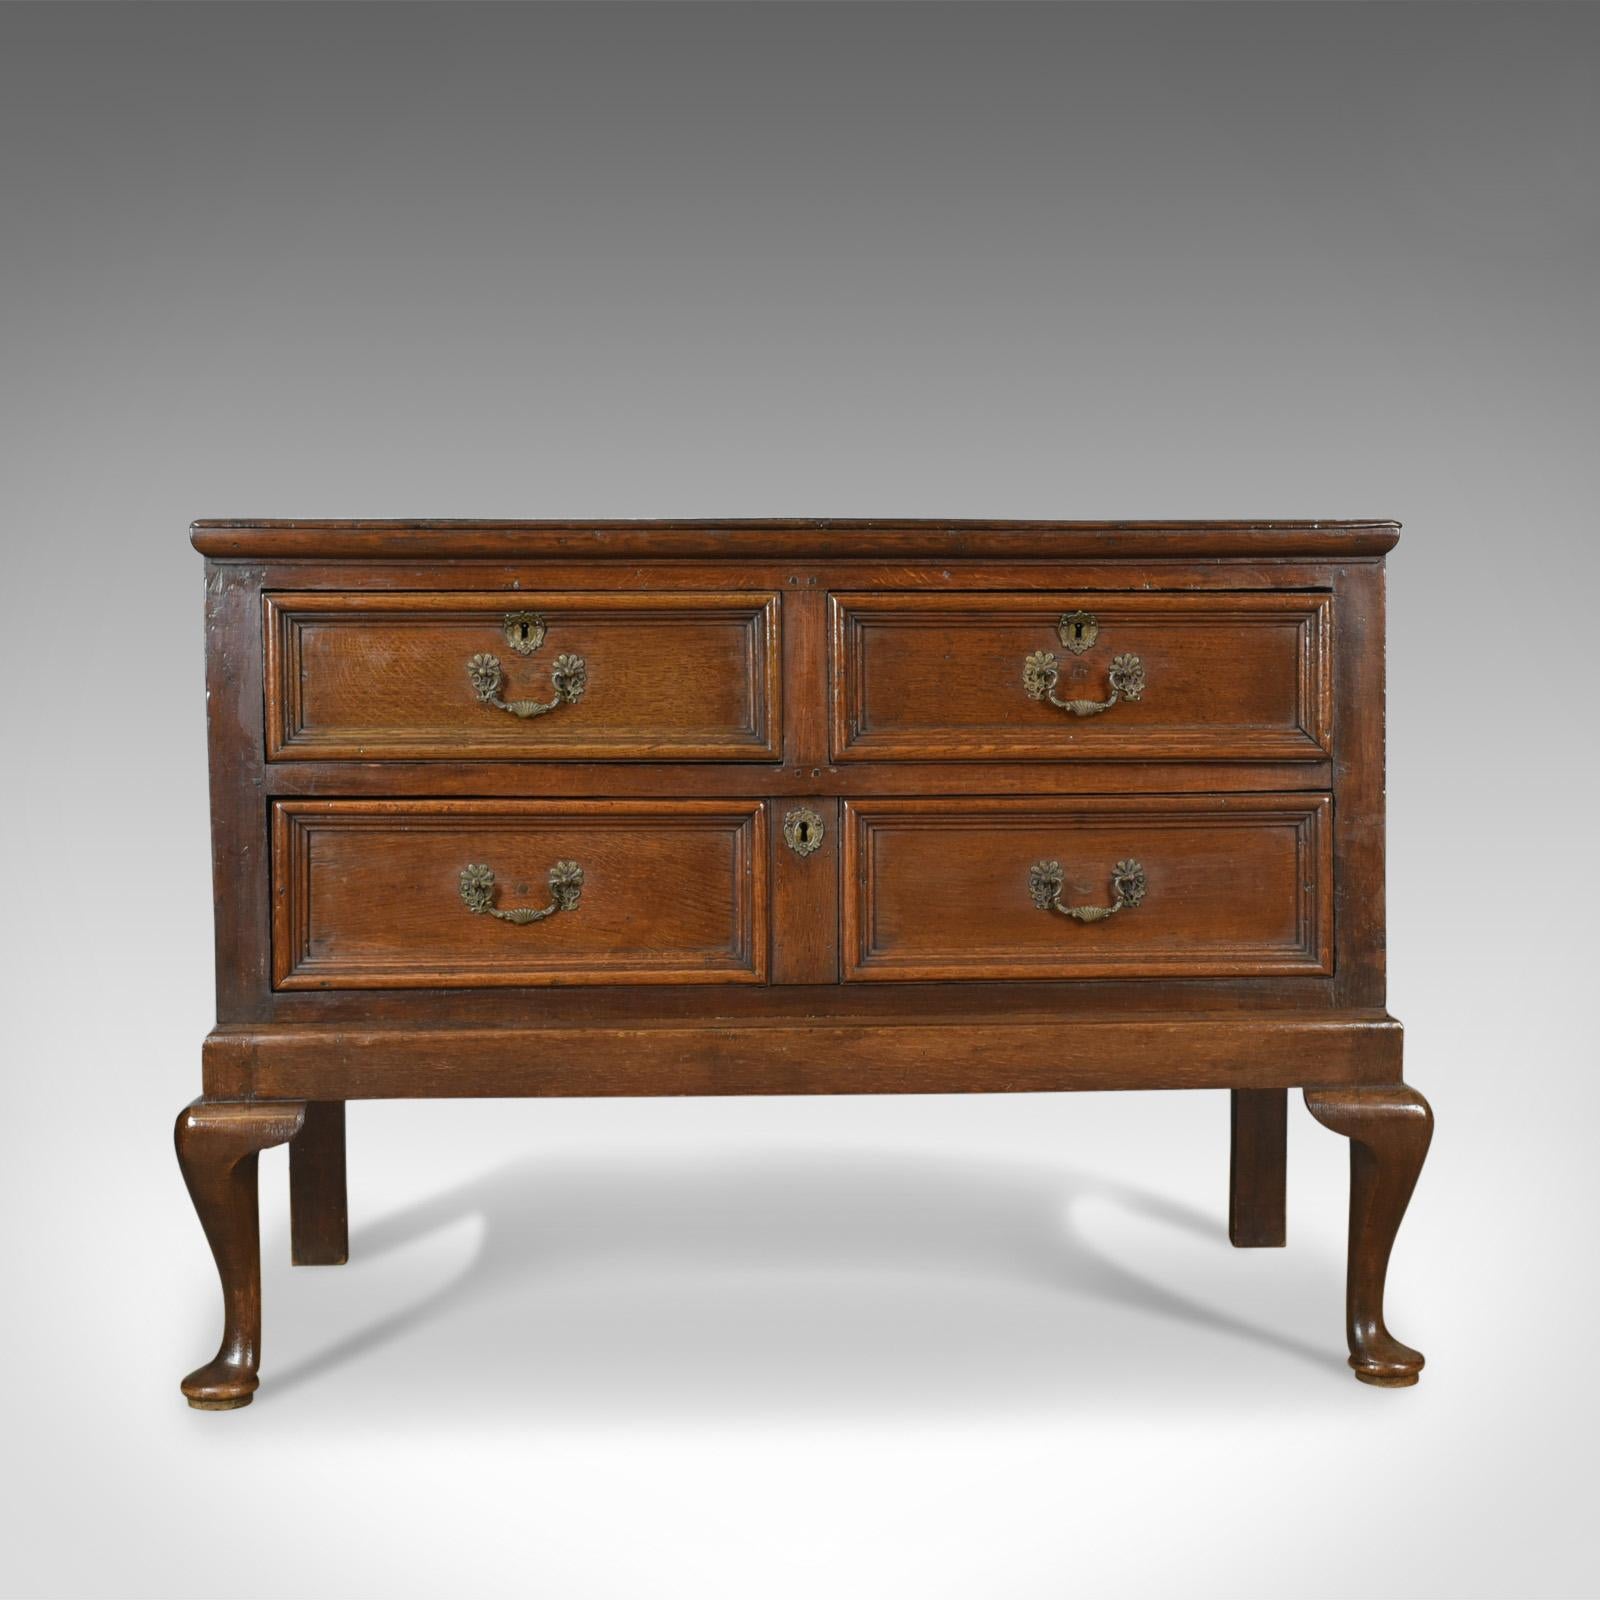 This is an antique chest on stand, an English, Early Georgian, oak chest of drawers dating to the early 18th century, circa 1720.

Broad and deep chest of pleasing proportions
Solid English oak with good color throughout
Grain interest